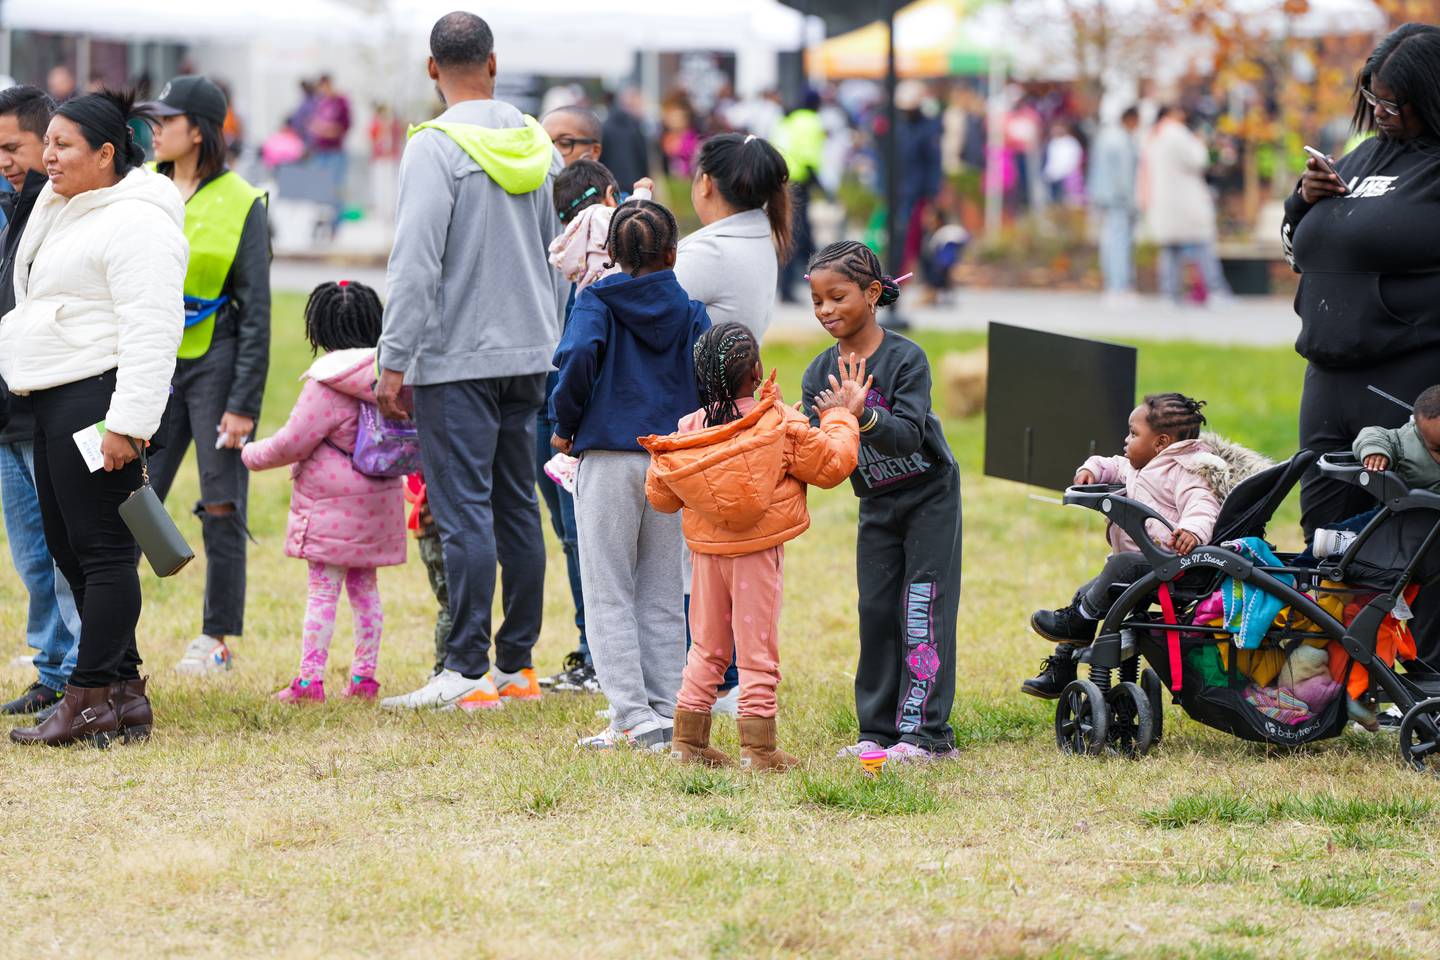 Children play Pat-A-Cake, while waiting in line for one of the many rides and attractions at the Harbor Harvest Festival. The event was located in the Inner Harbor, right next to the newly constructed Rash Field Park.